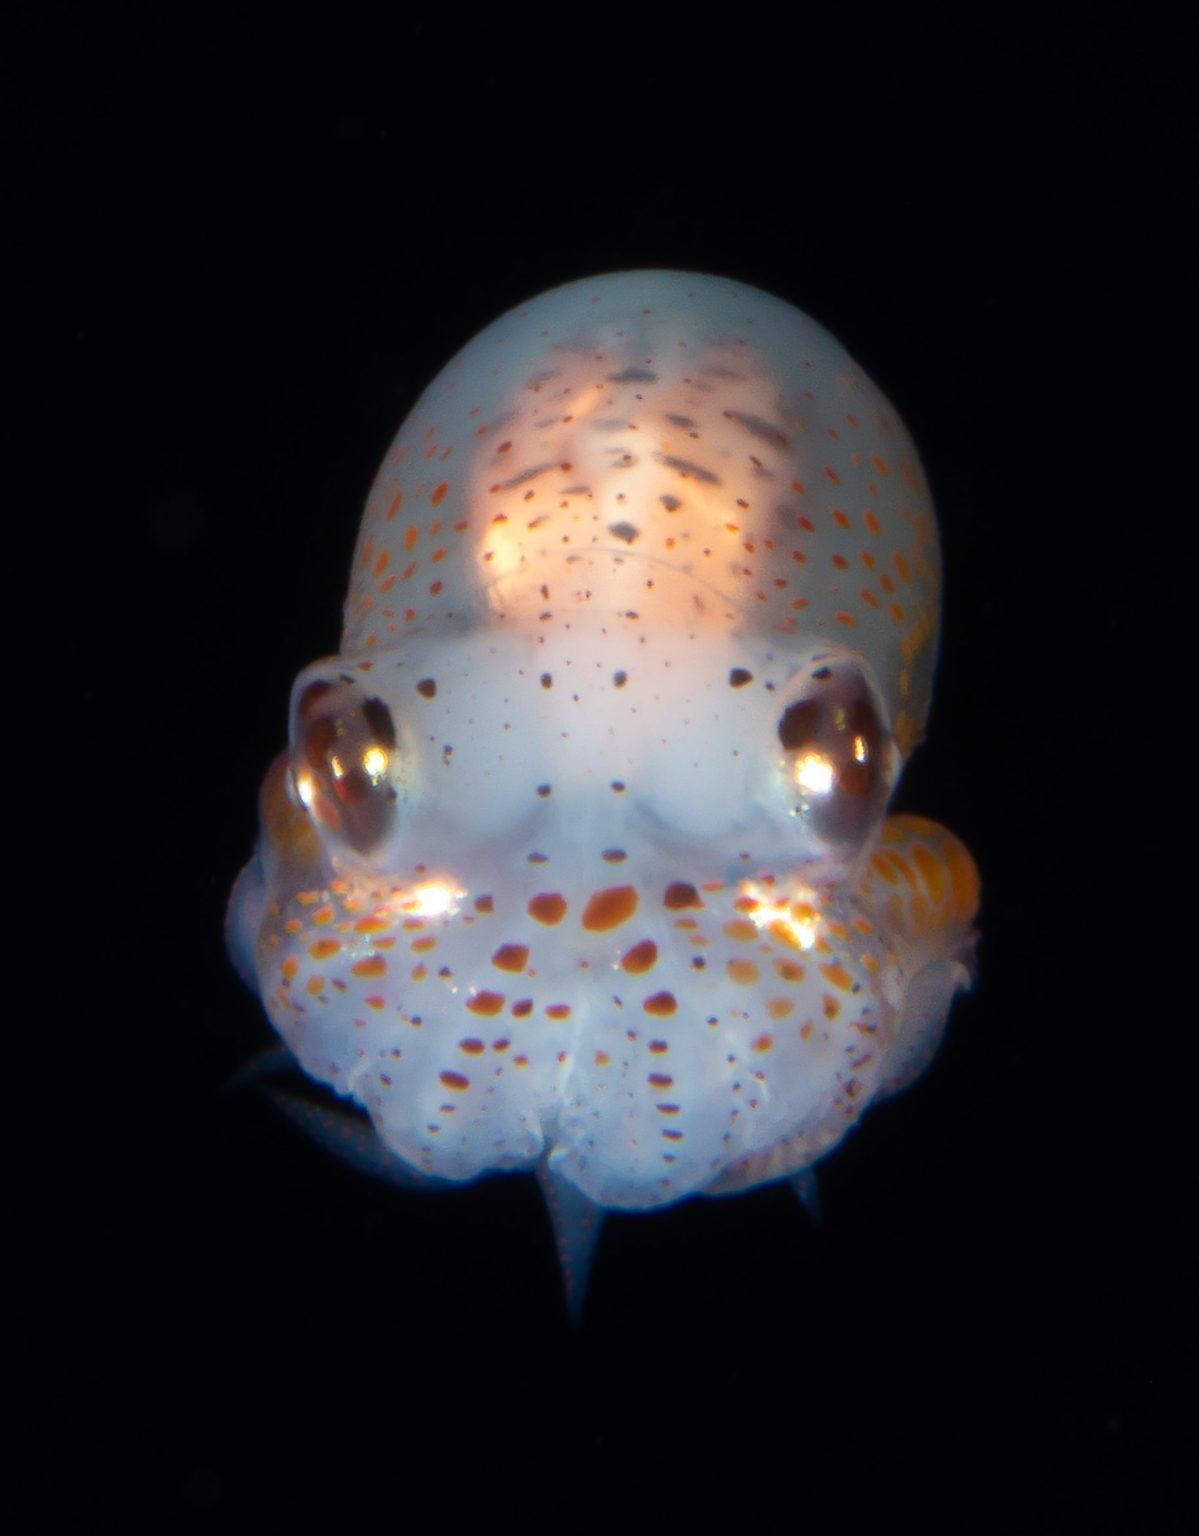 a close up of a squid with orange spots on it